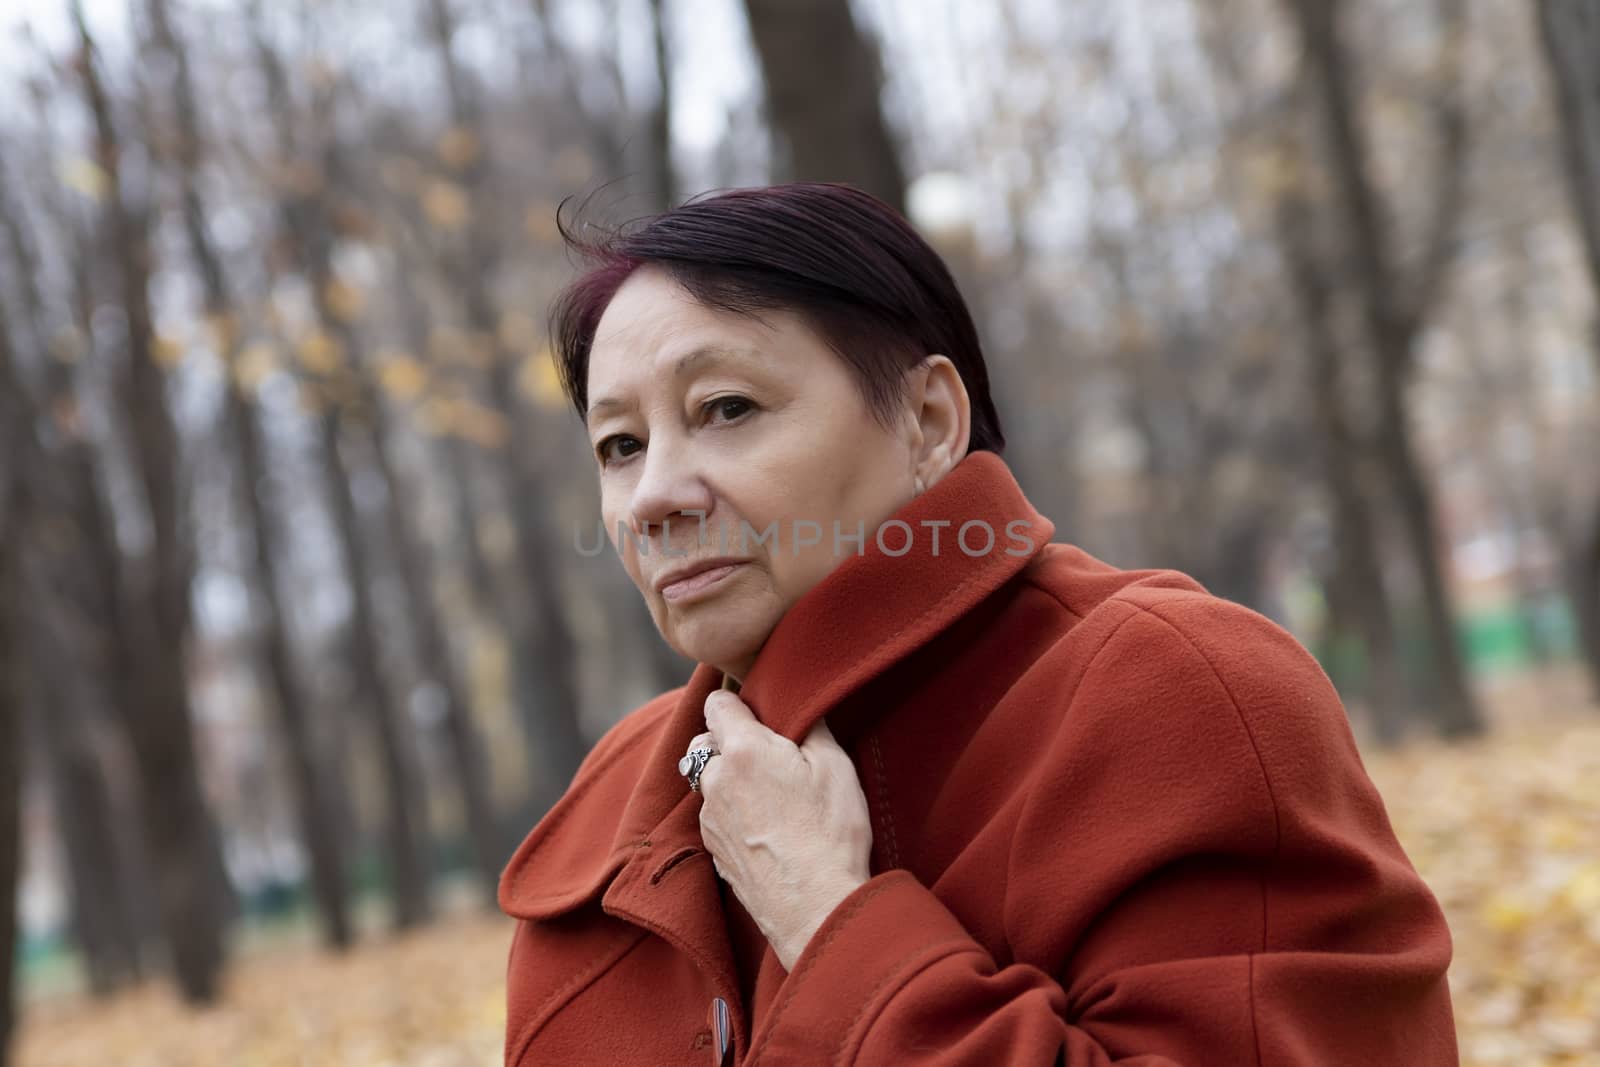 Senior woman in the park in autumn by bonilook